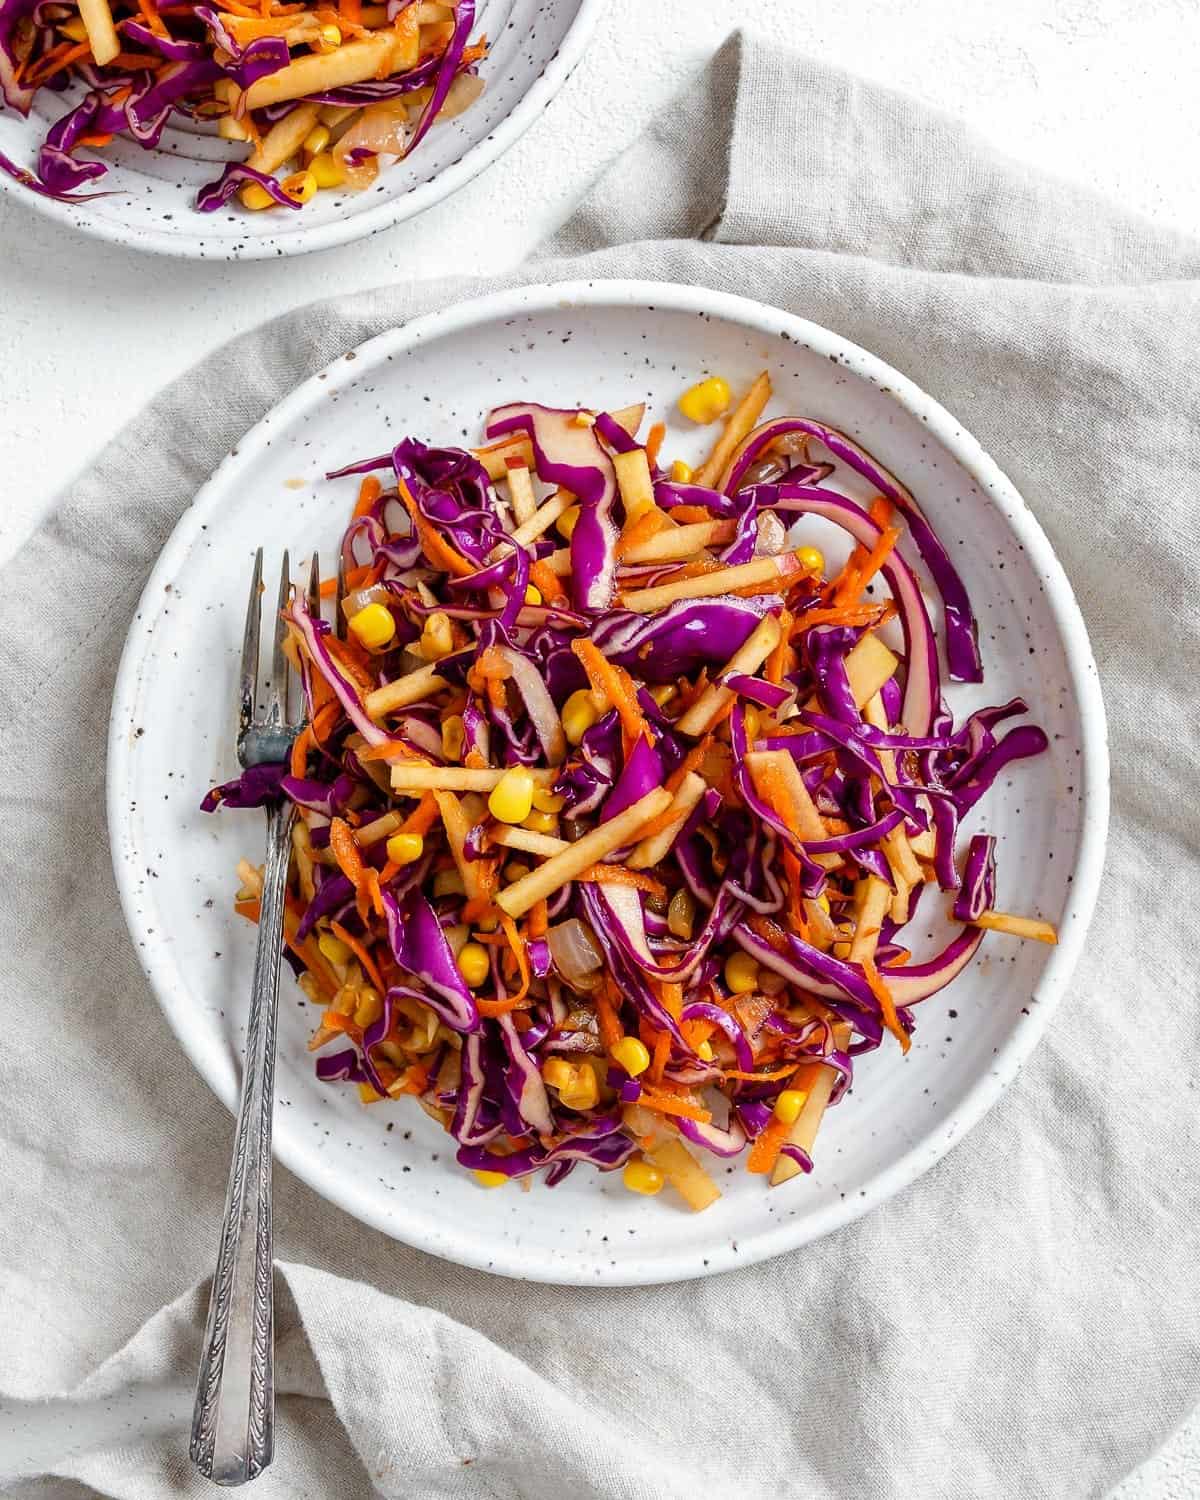 completed vegan slaw on a white plate against a light background